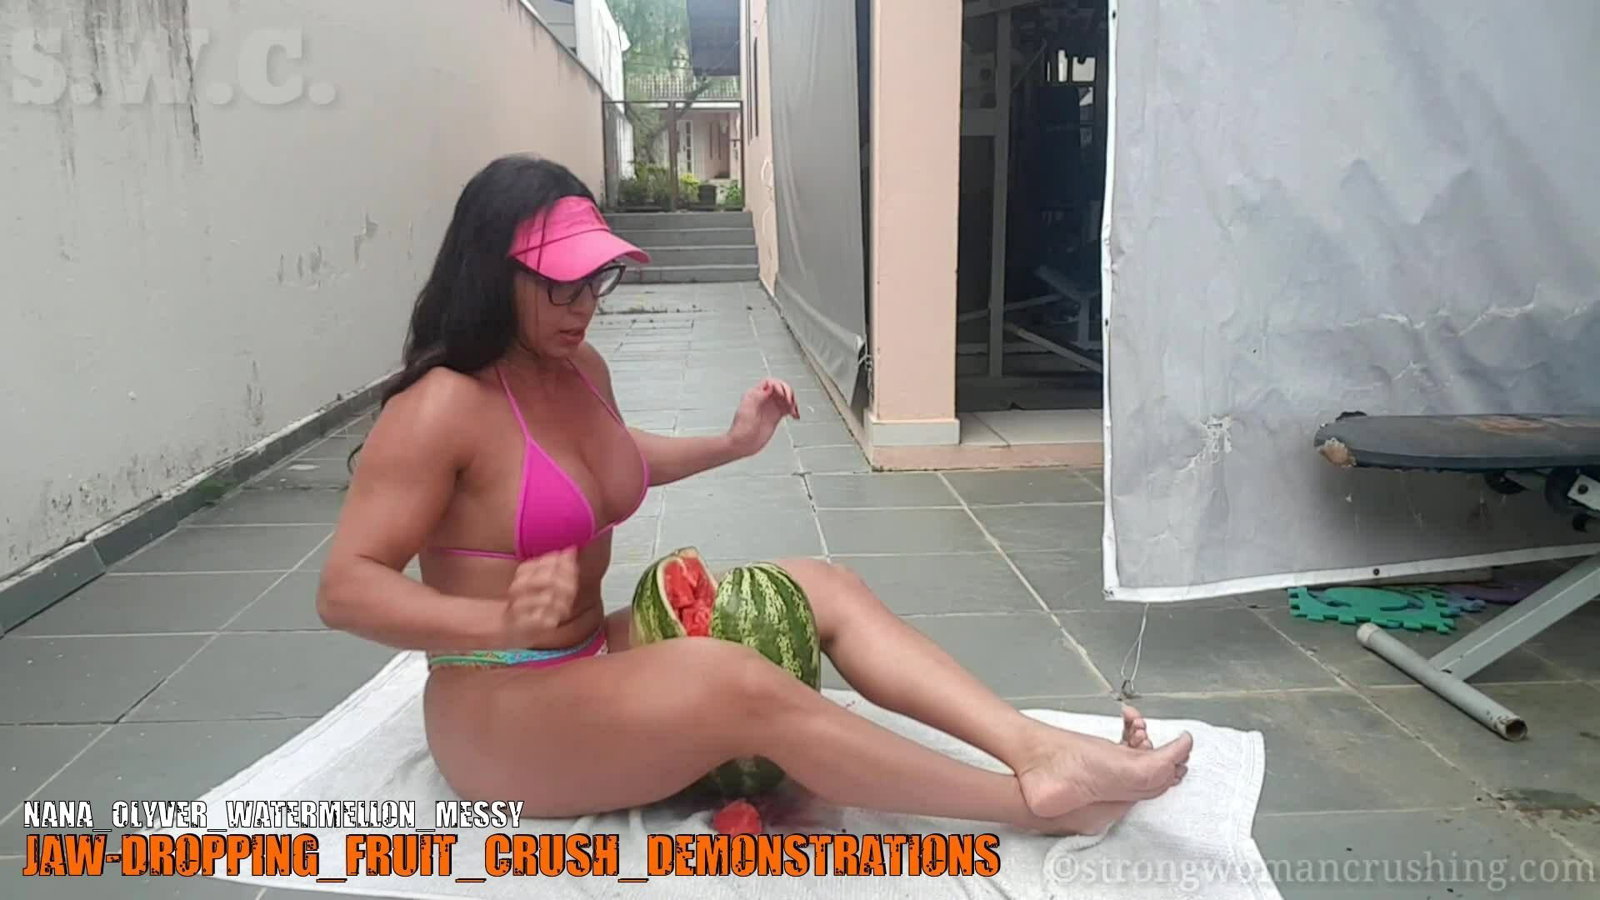 Photo by MusclegirlStrength with the username @MusclegirlStrength, who is a brand user,  October 3, 2023 at 6:52 PM and the text says '🍉🍉 Check out the hilarious new video about Nana Olyver Watermellon Messy with Nana! 🤣 Get your membership now to watch it at www.strongwomancrushing.com 💪 #StrongWomanCrushing #NanaOlyver #WatermellonMessy #FunnyVideos #MembershipBenefits'